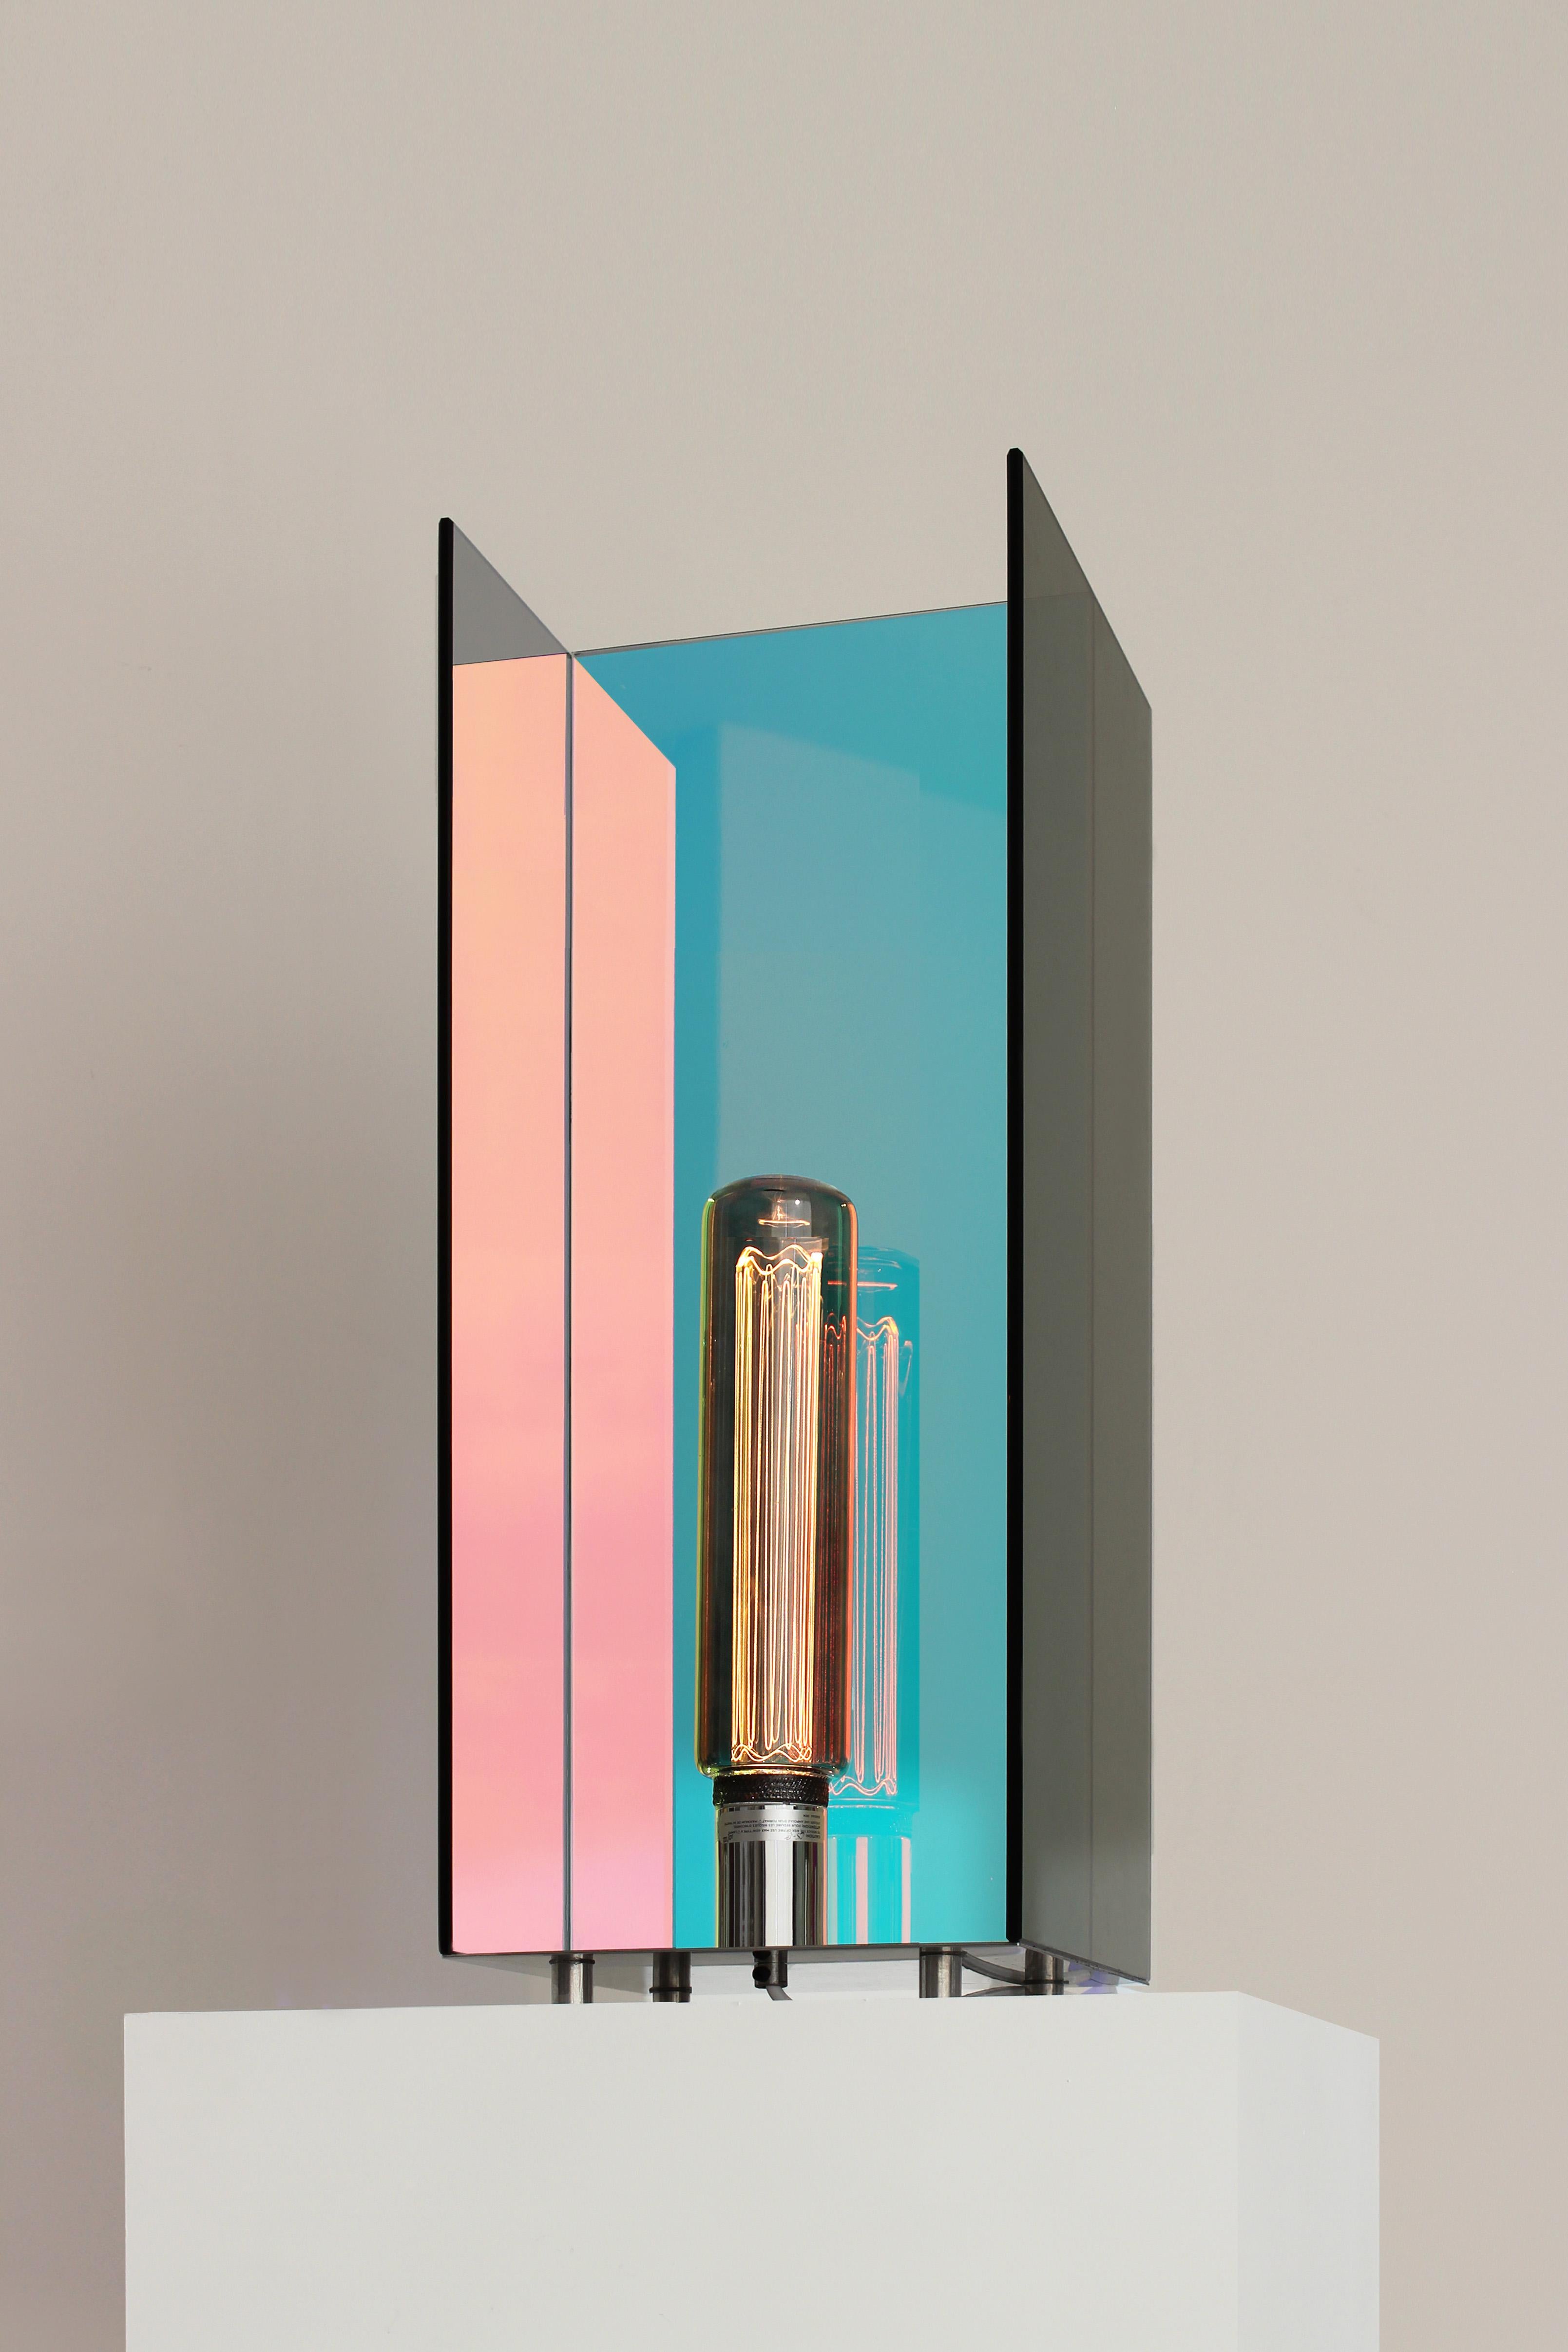 As seen in: Dwell Magazine, Sight Unseen, Design Milk, and Hypebeast

I-Beam II Light is the newest version of the VIEW I-Beam Light. The original version was released as part of VIEW, a five-piece collection of sculptural glass and mirror furniture